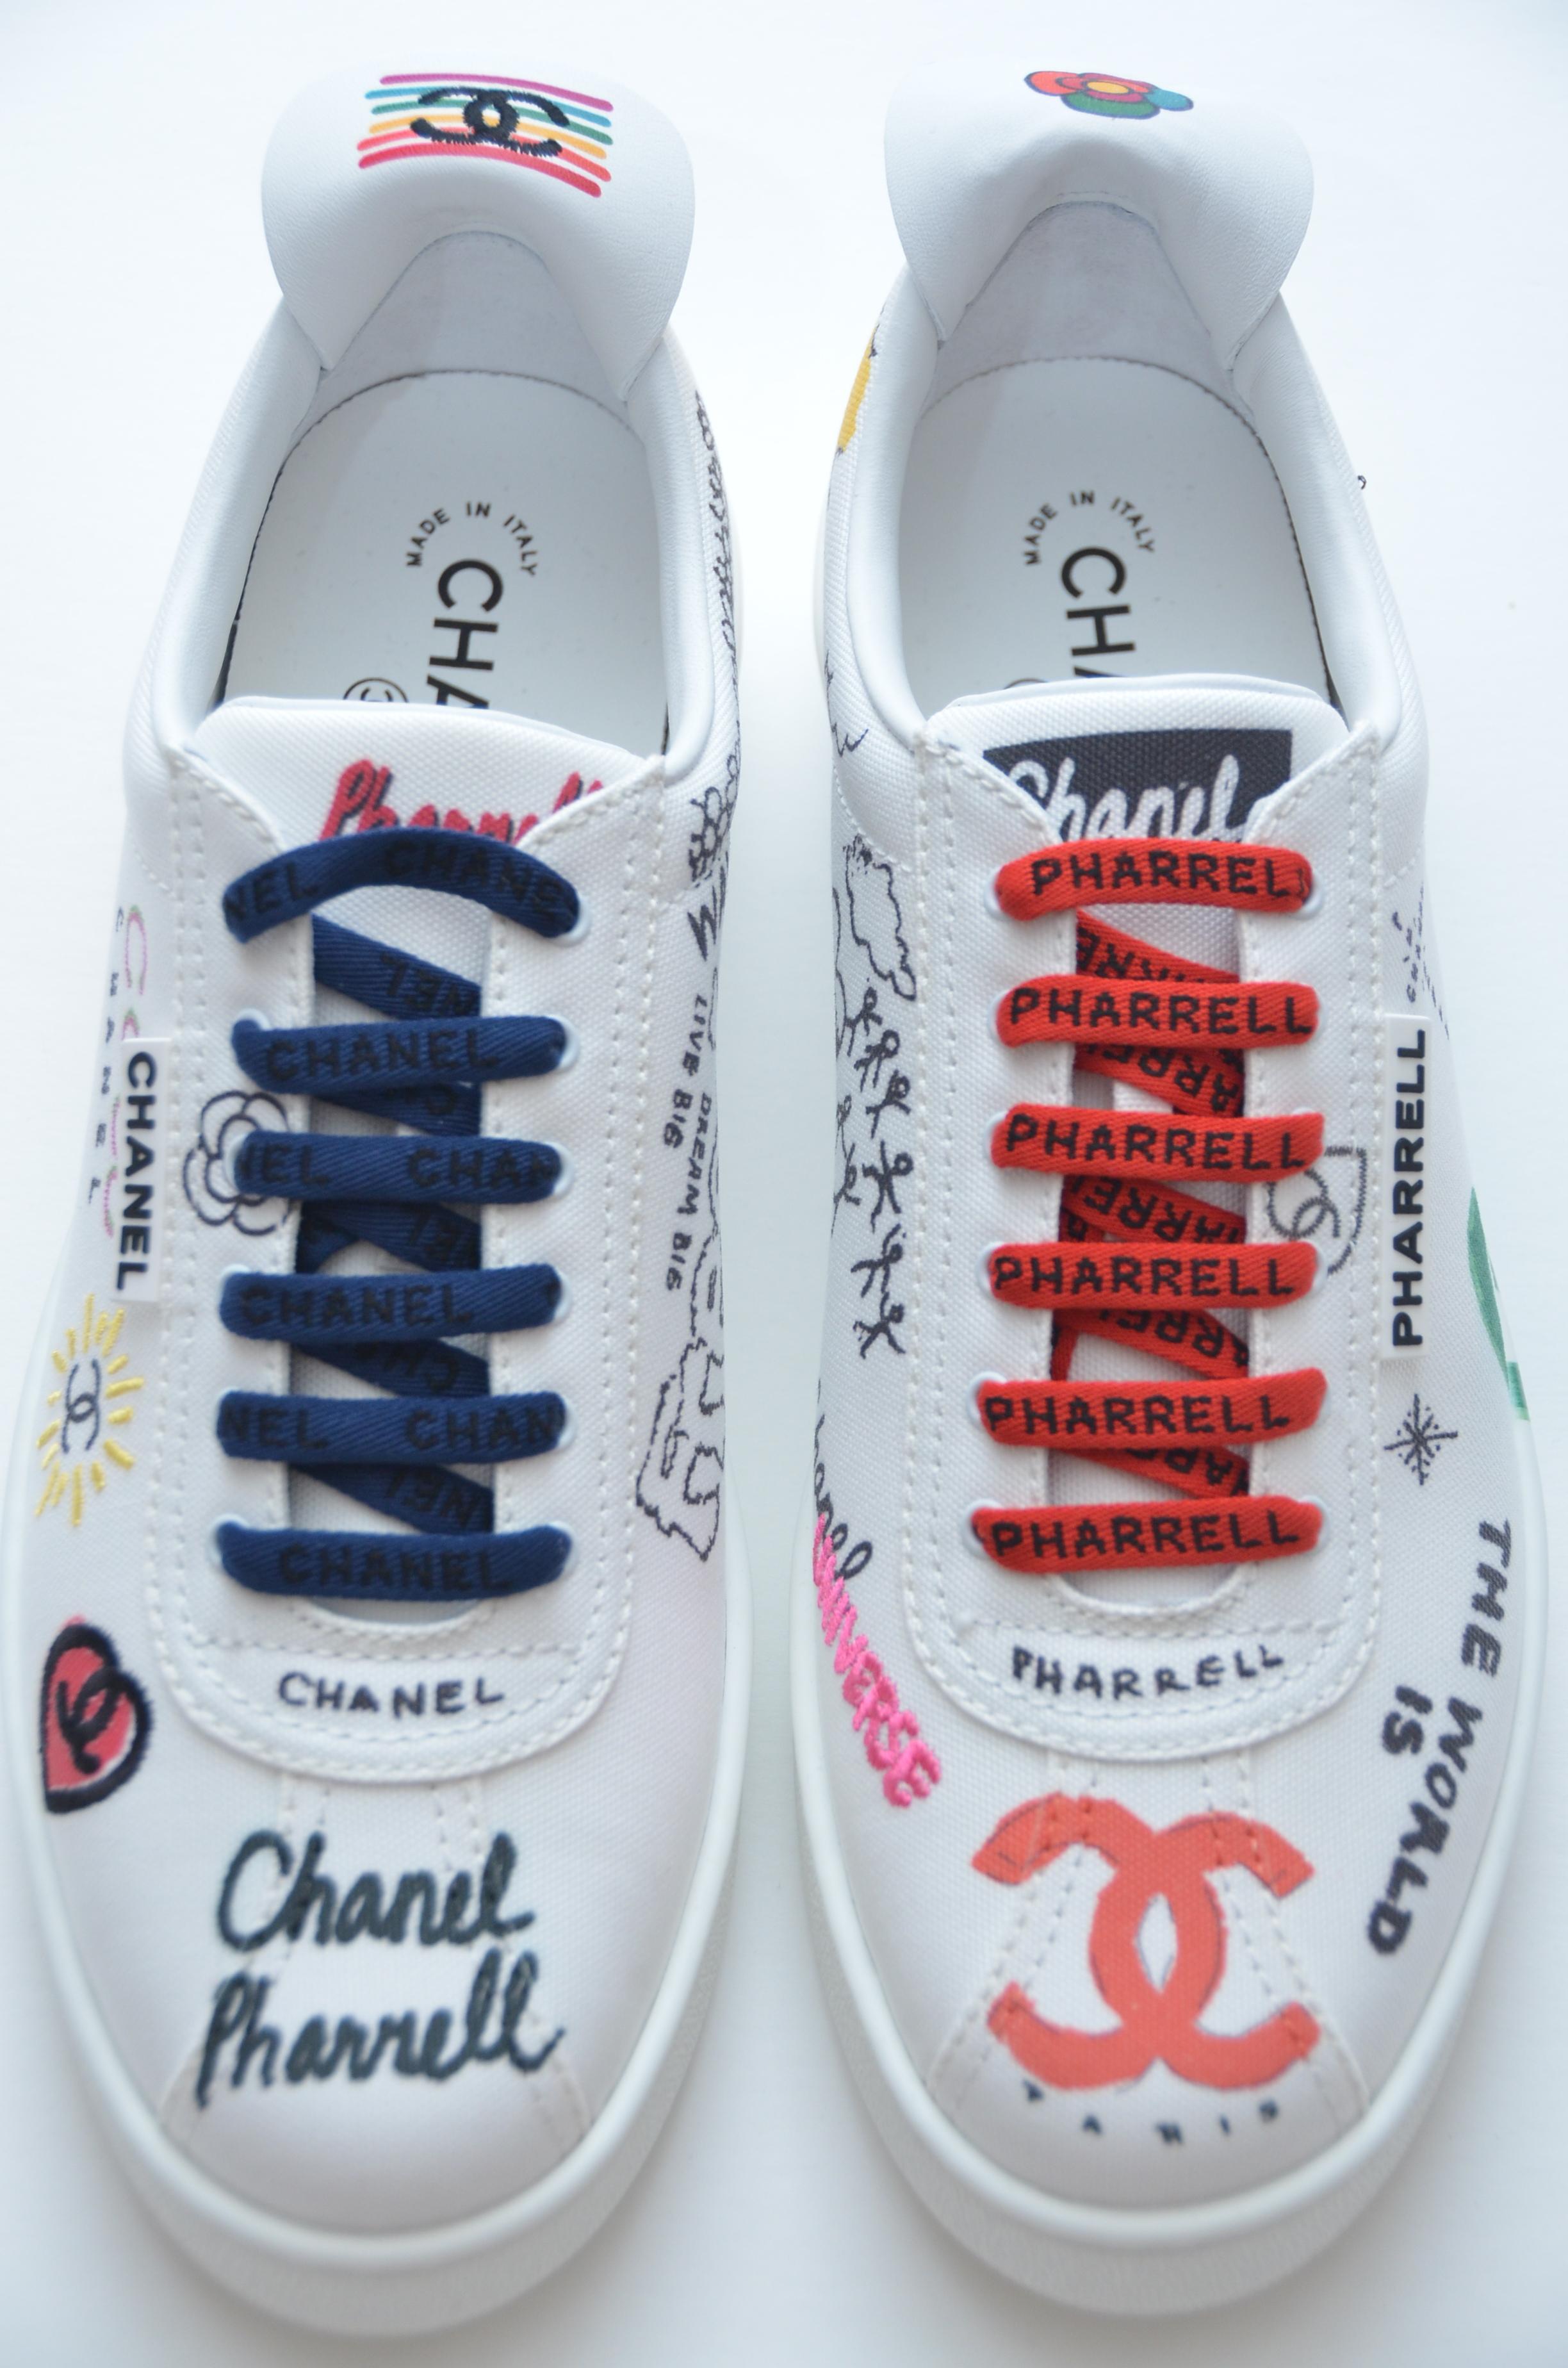 chanel pharrell sneakers for sale